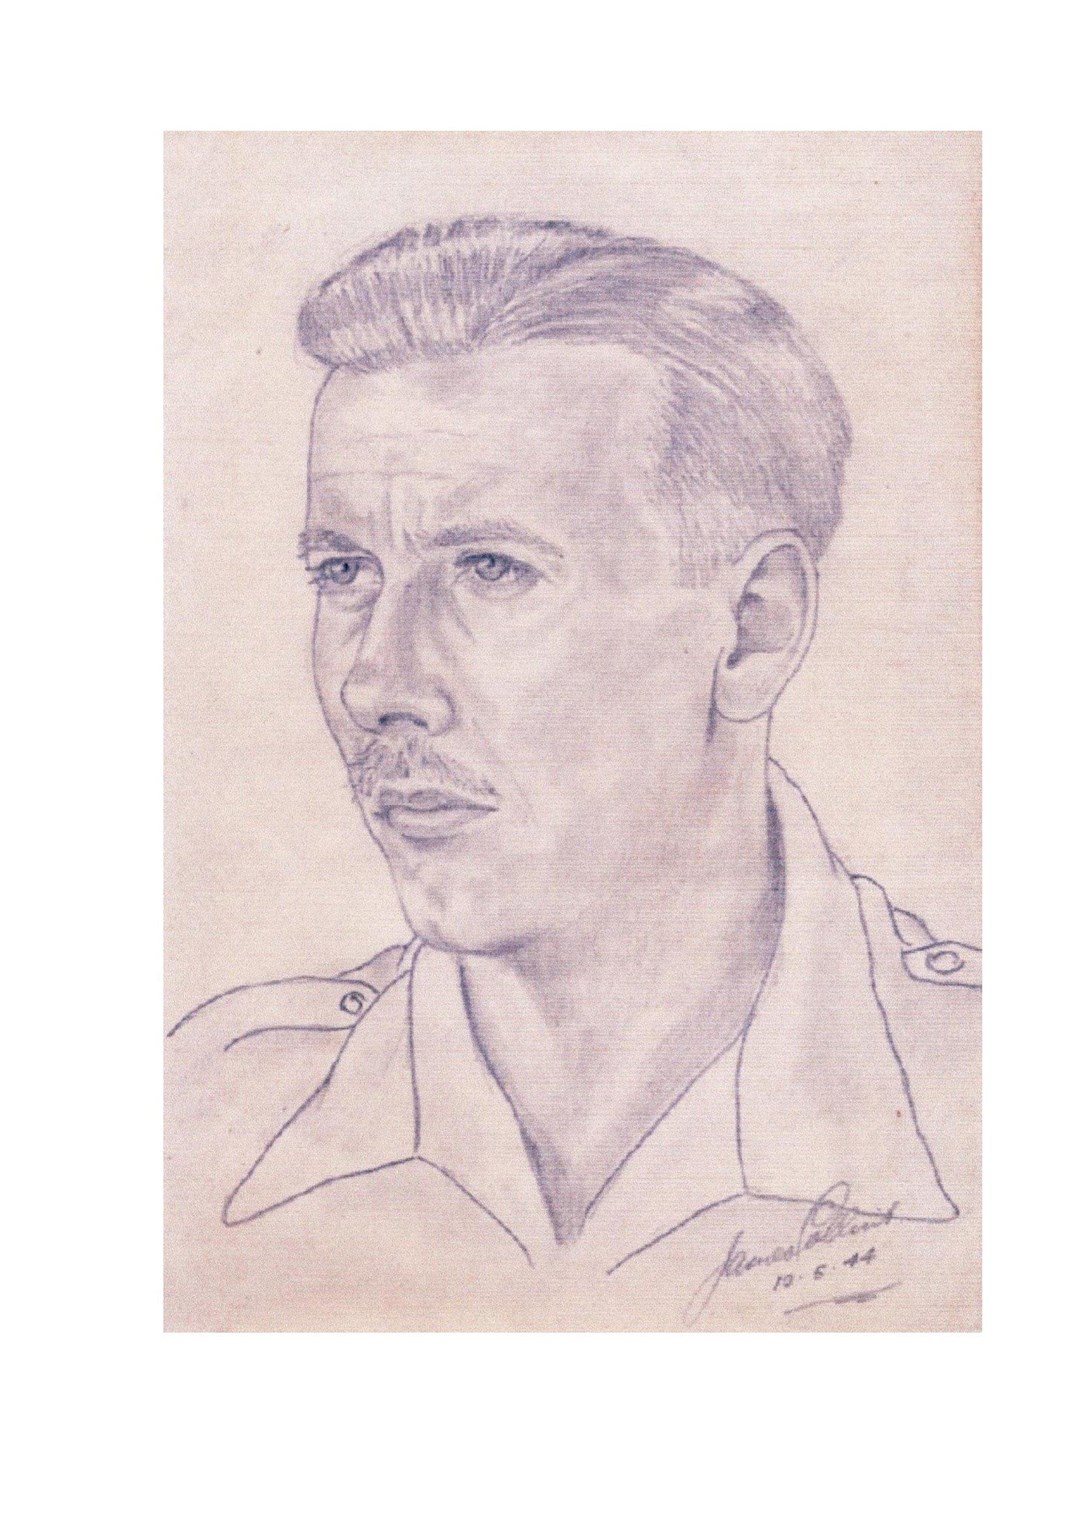 Bill in a drawing by a fellow POW.